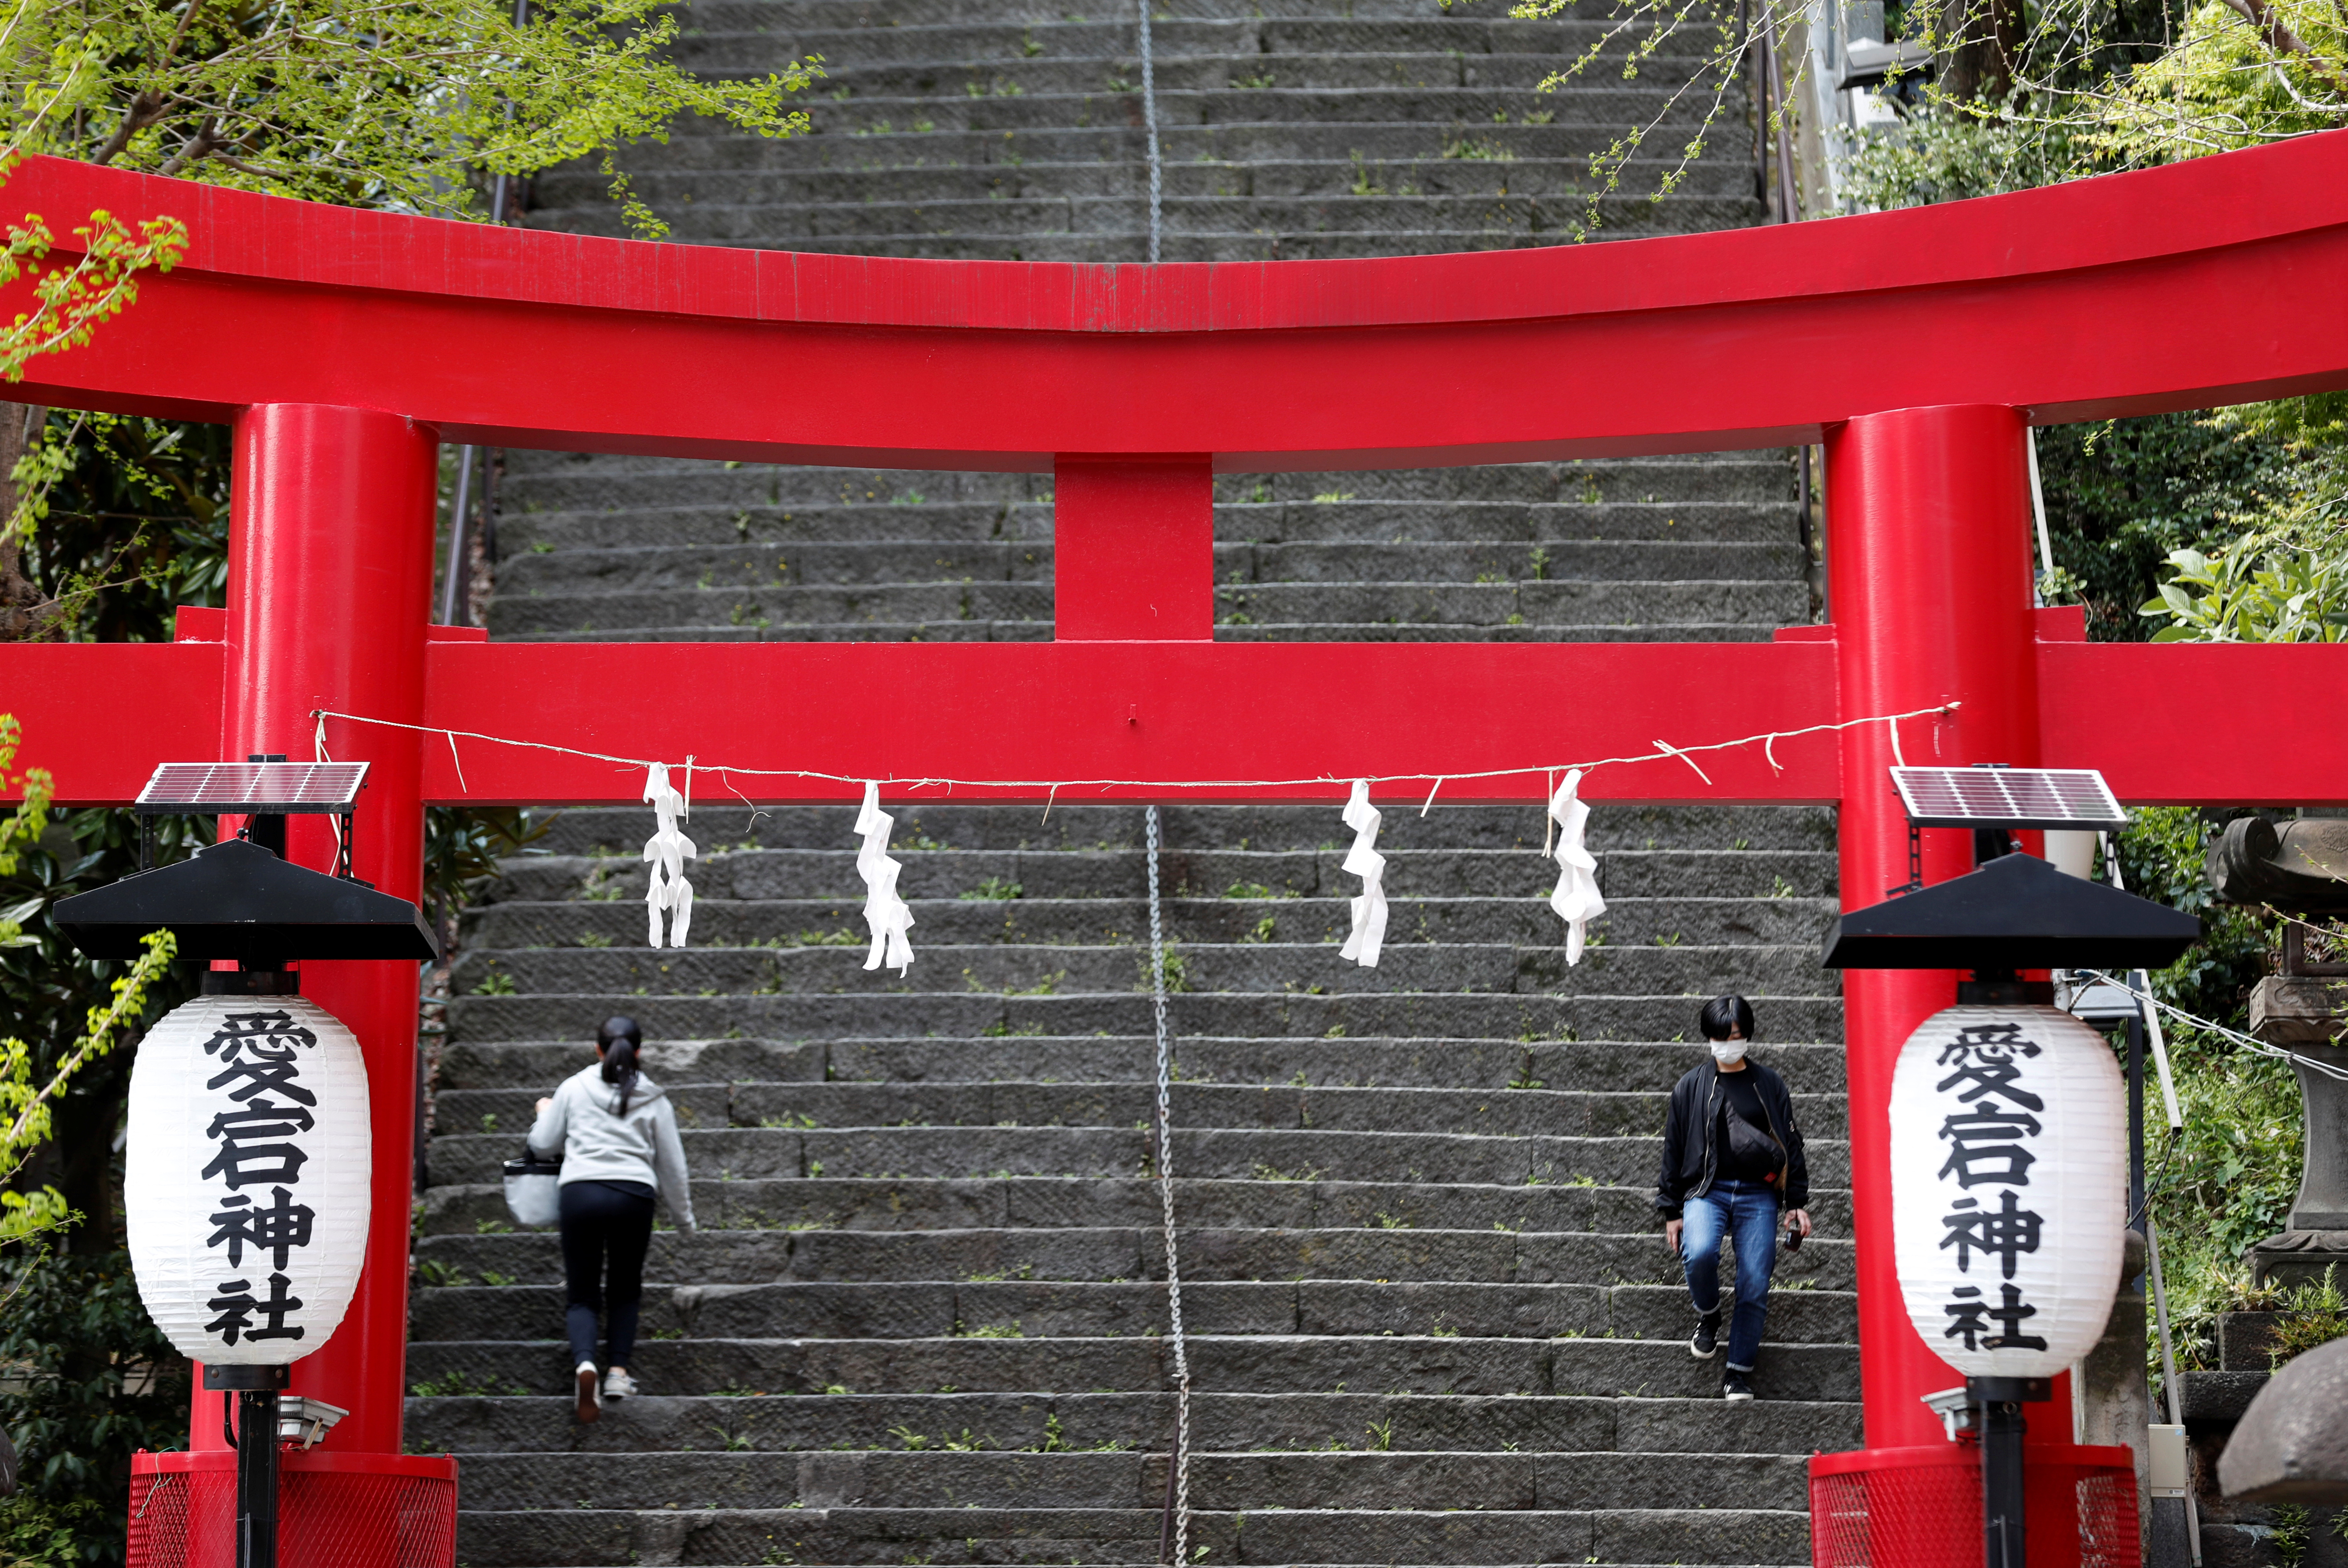 People walk on a flight of steps after the government announced a state of emergency for the capital and some prefectures following the coronavirus disease (Covid-19) outbreak, in Tokyo, Japan April 16, 2020. u00e2u20acu2022 Reuters pic